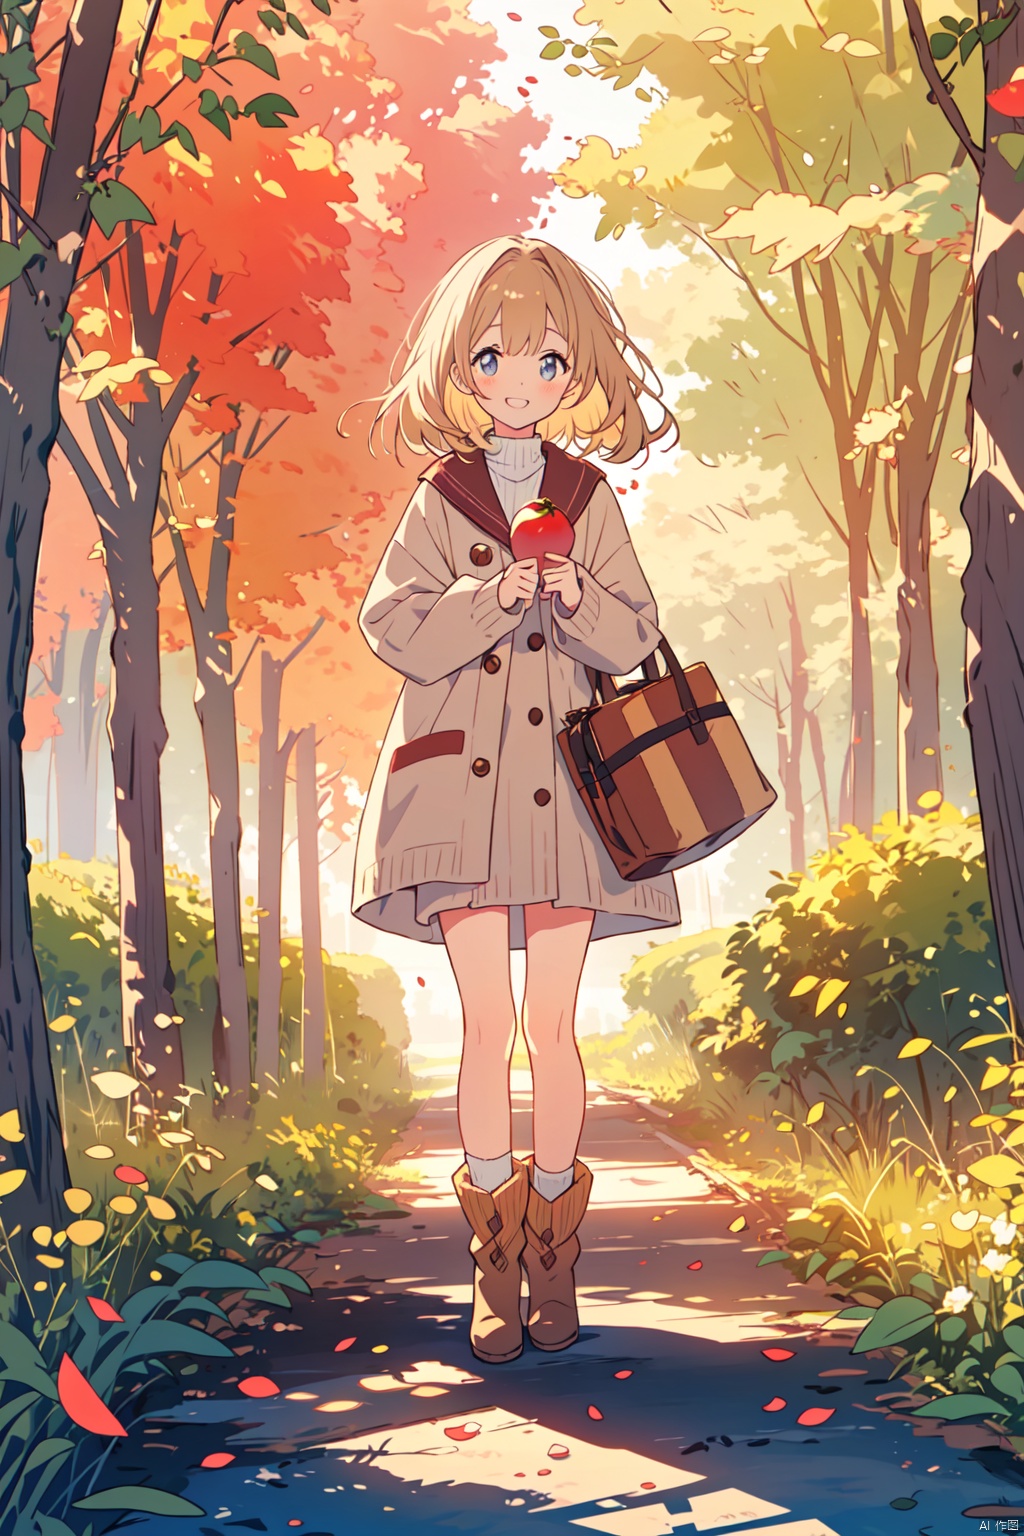 A young girl, embracing a basket of freshly picked apples, under a blossoming cherry tree in autumn, surrounded by fallen leaves in shades of red and gold, wearing an oversized woolen sweater, ankle boots, with rosy cheeks and a joyful grin, sunshine filtering through the colorful foliage casting dappled light upon her, against a backdrop of a charming countryside orchard., ((poakl))